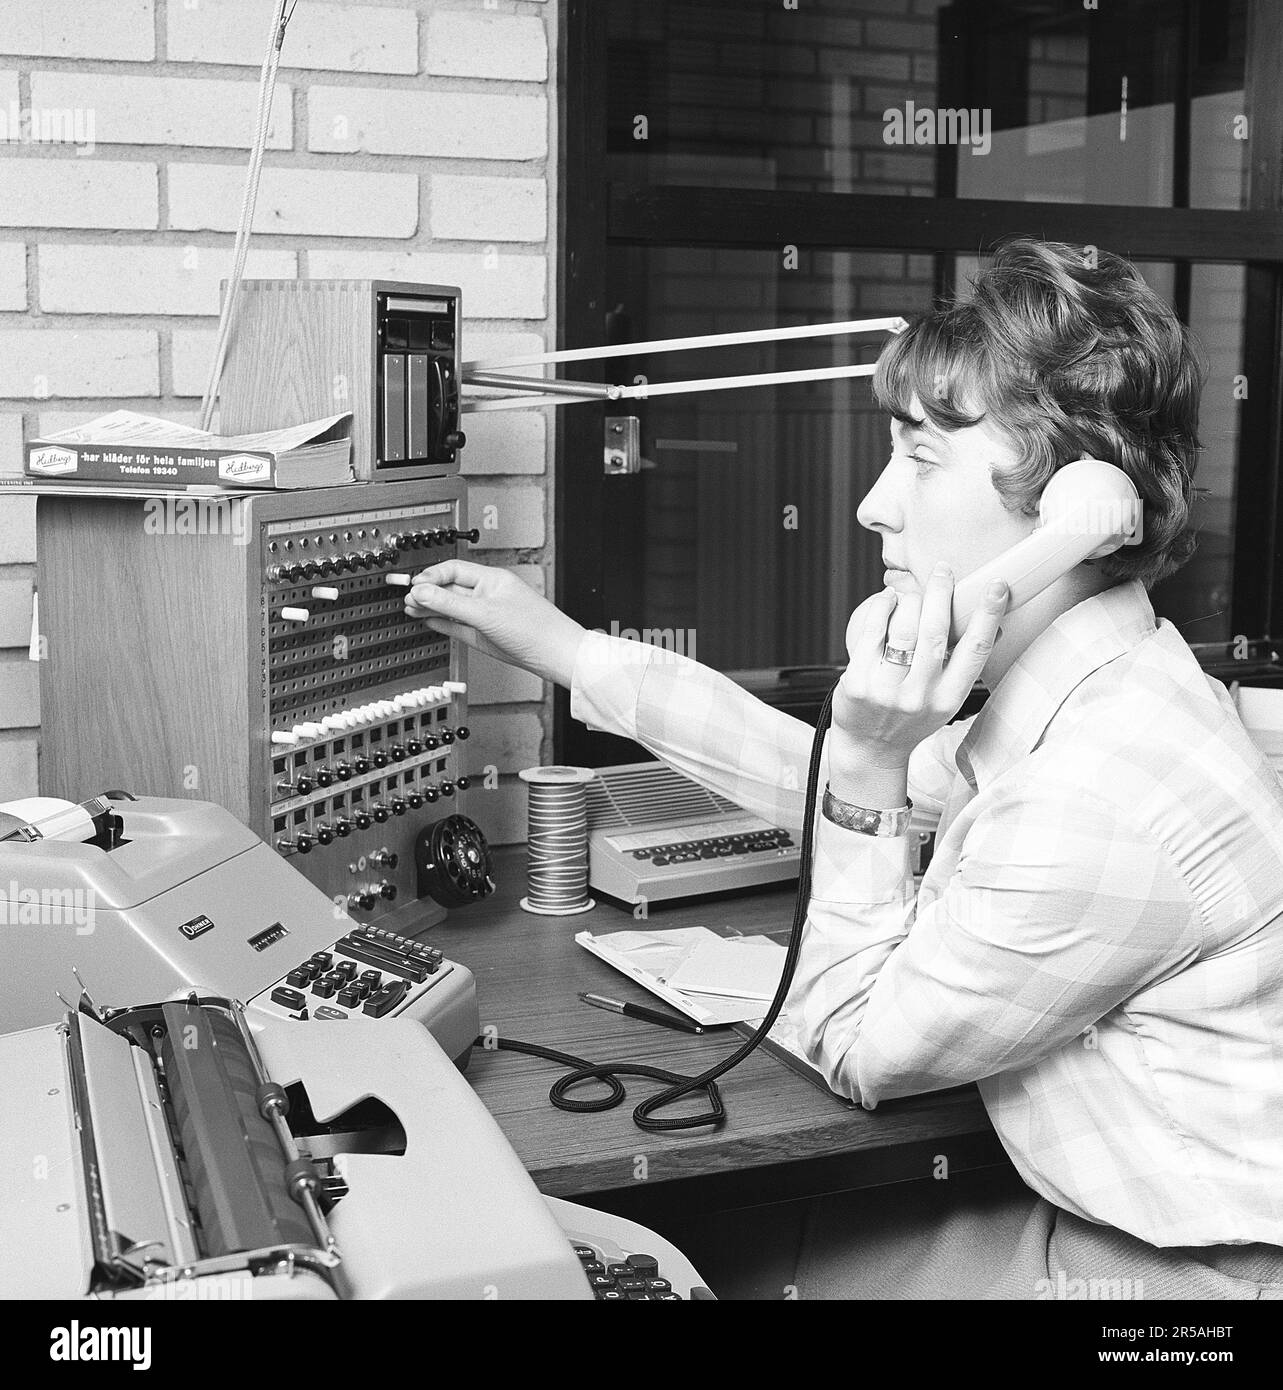 Telephony in the 1960s. Woman working at a telephone switchboard as it's operator. A telephone communication system that was manually operated where the incoming calls were forwarded and redirected to the another telephone number by the operator, in this case locally within the building serving a company or an organization with many internal telephone lines. The switchboard operator could take messages, put you on hold if the line was busy. Sweden 1965. Kristoffersson ref BM99-10 Stock Photo